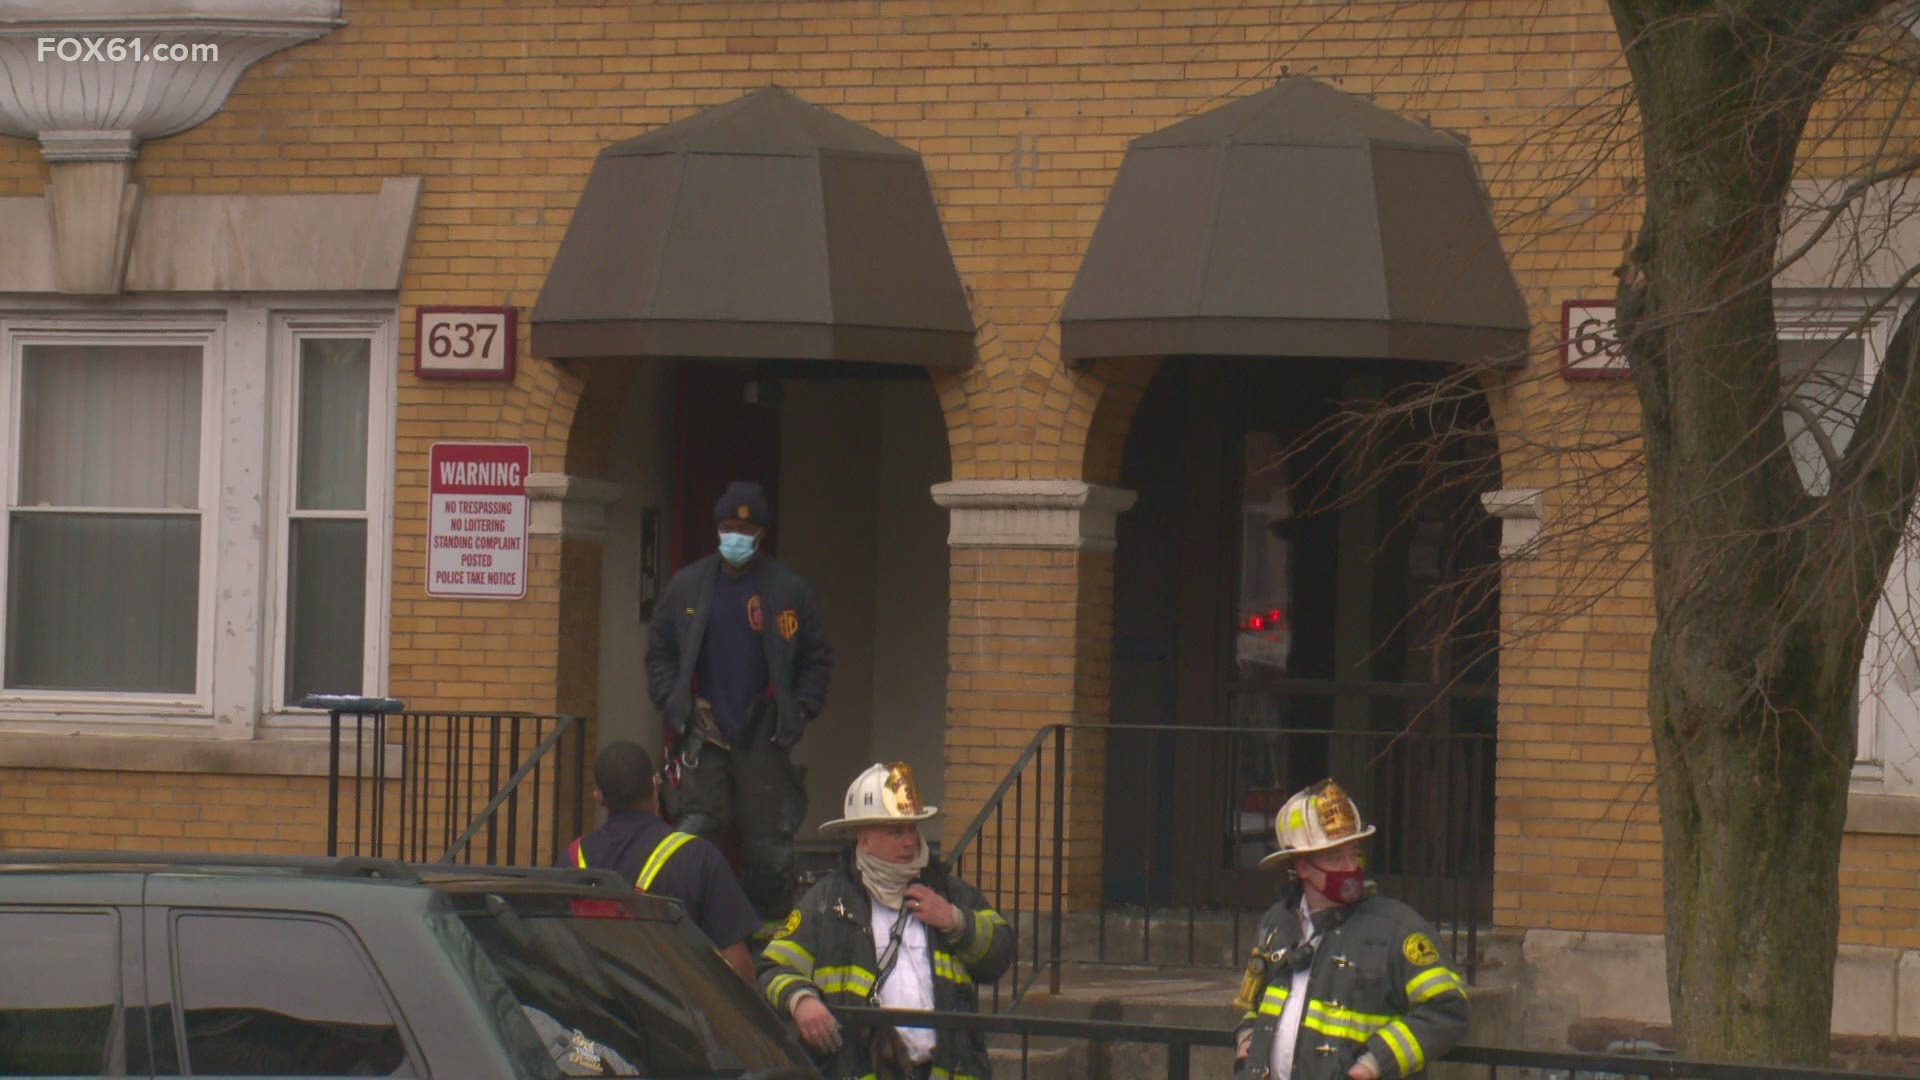 Most were being treated for smoke inhalation after an early morning fire on Broad Street.